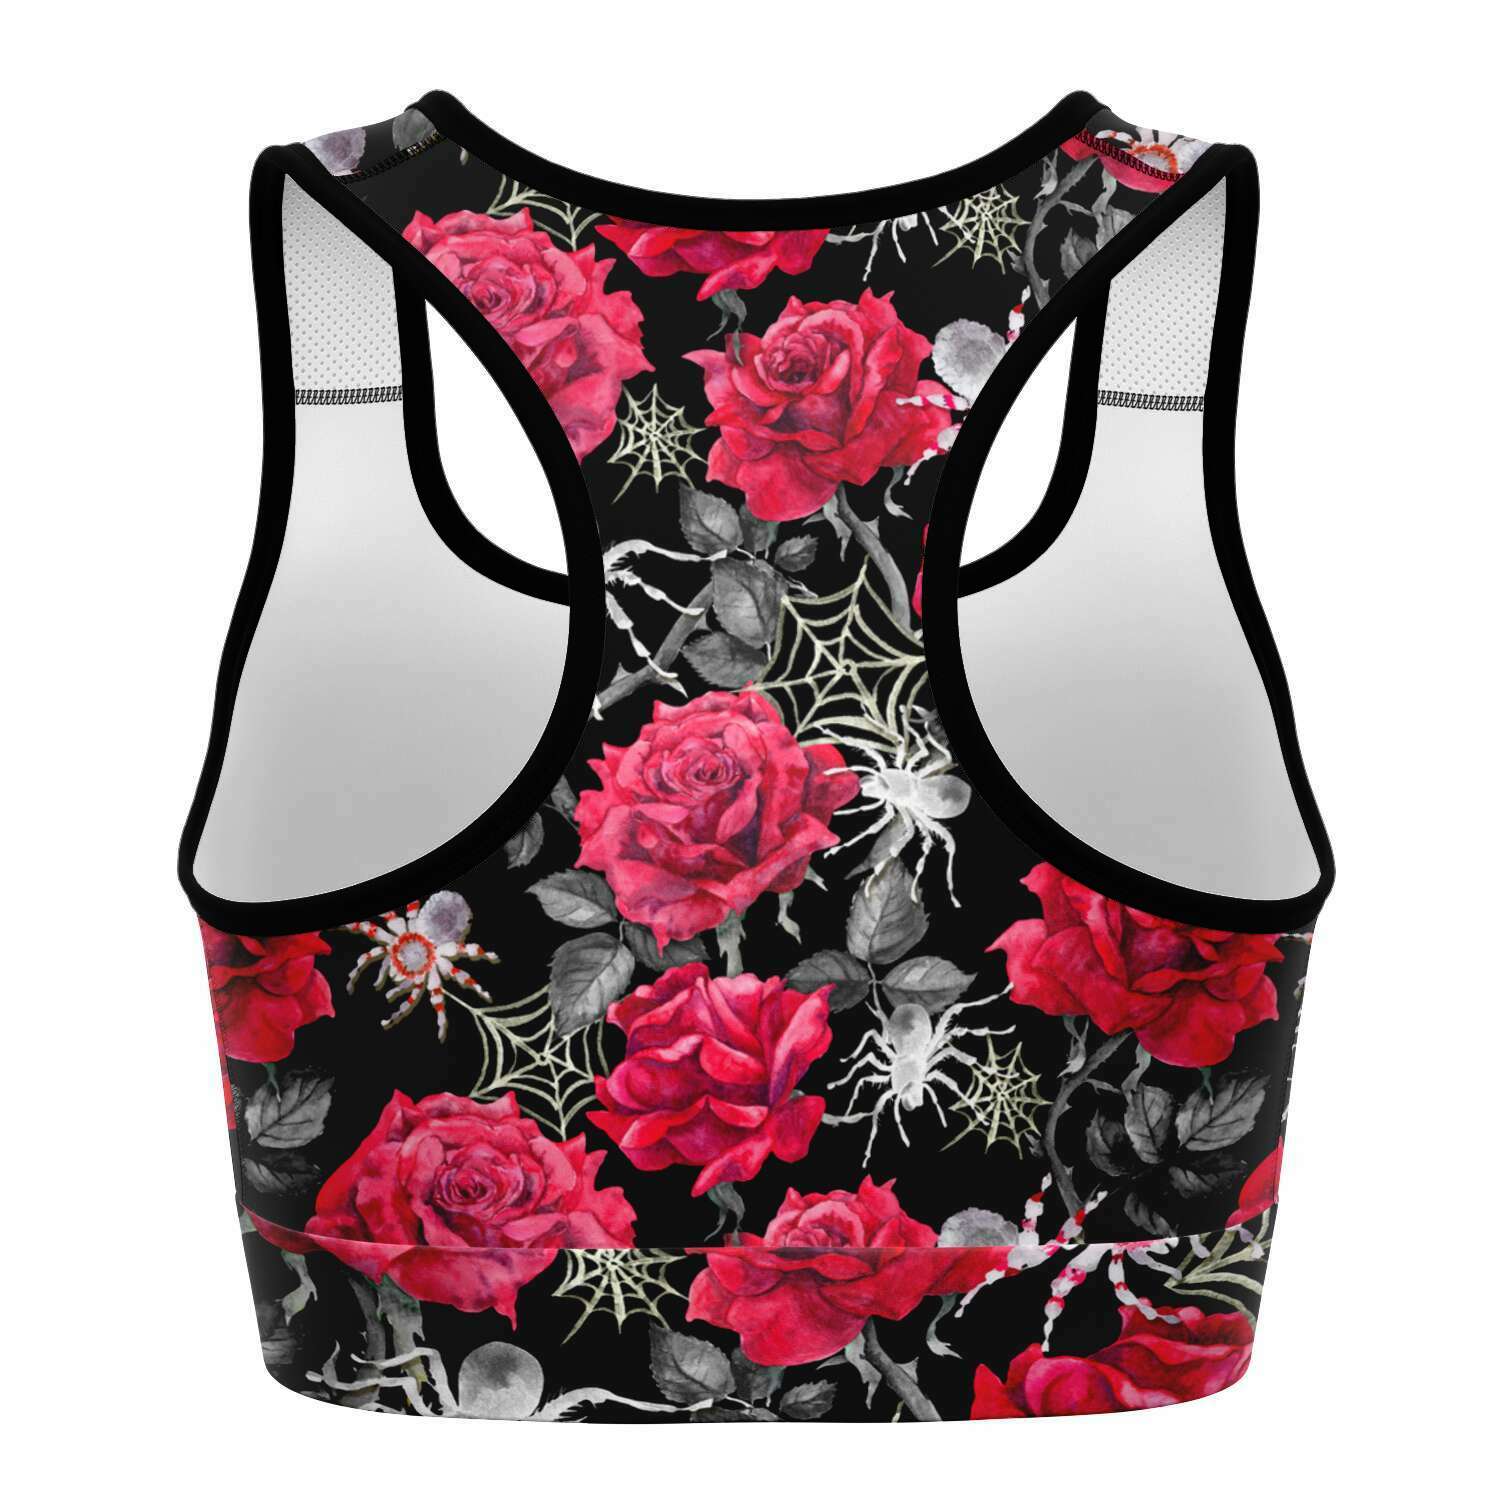 Women's Deadly Pink Roses & Spiders Halloween Athletic Sports Bra Back